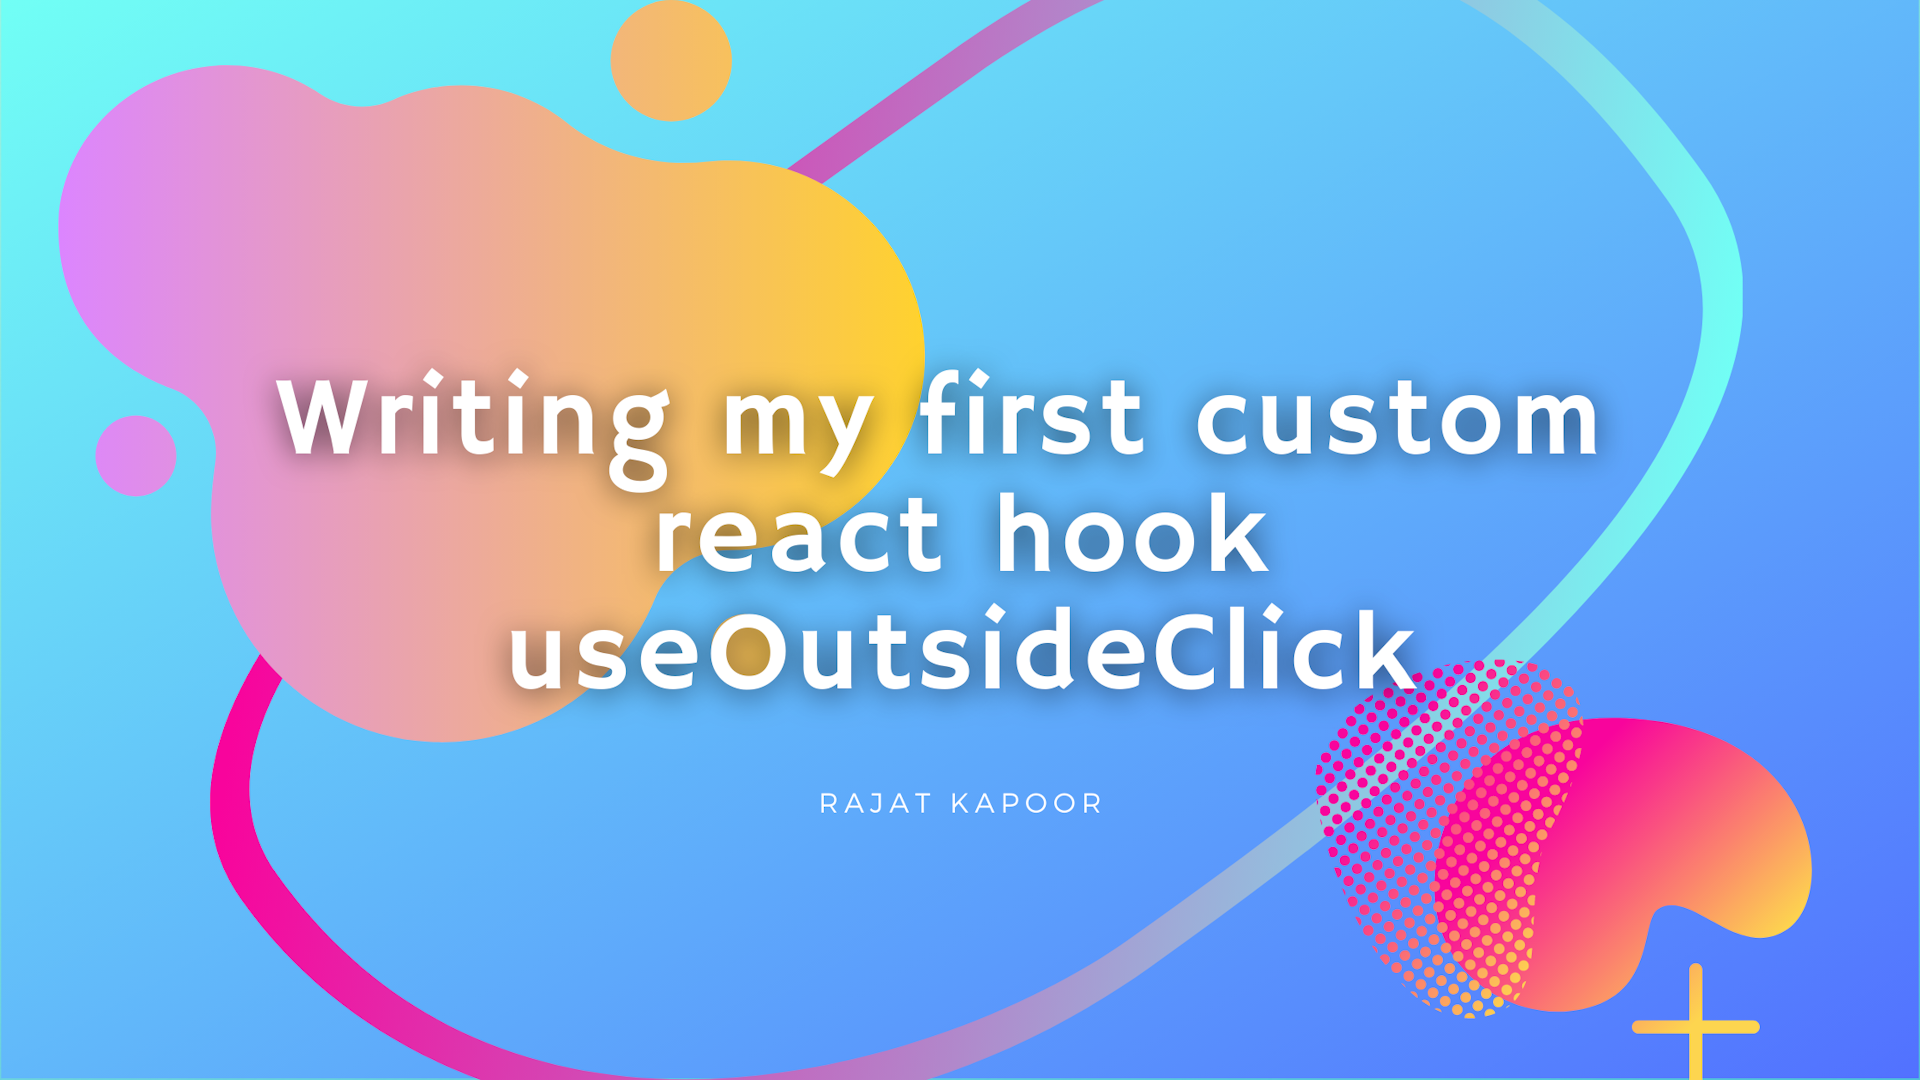 Cover Image for Writing my first custom react hook - useOutsideClick